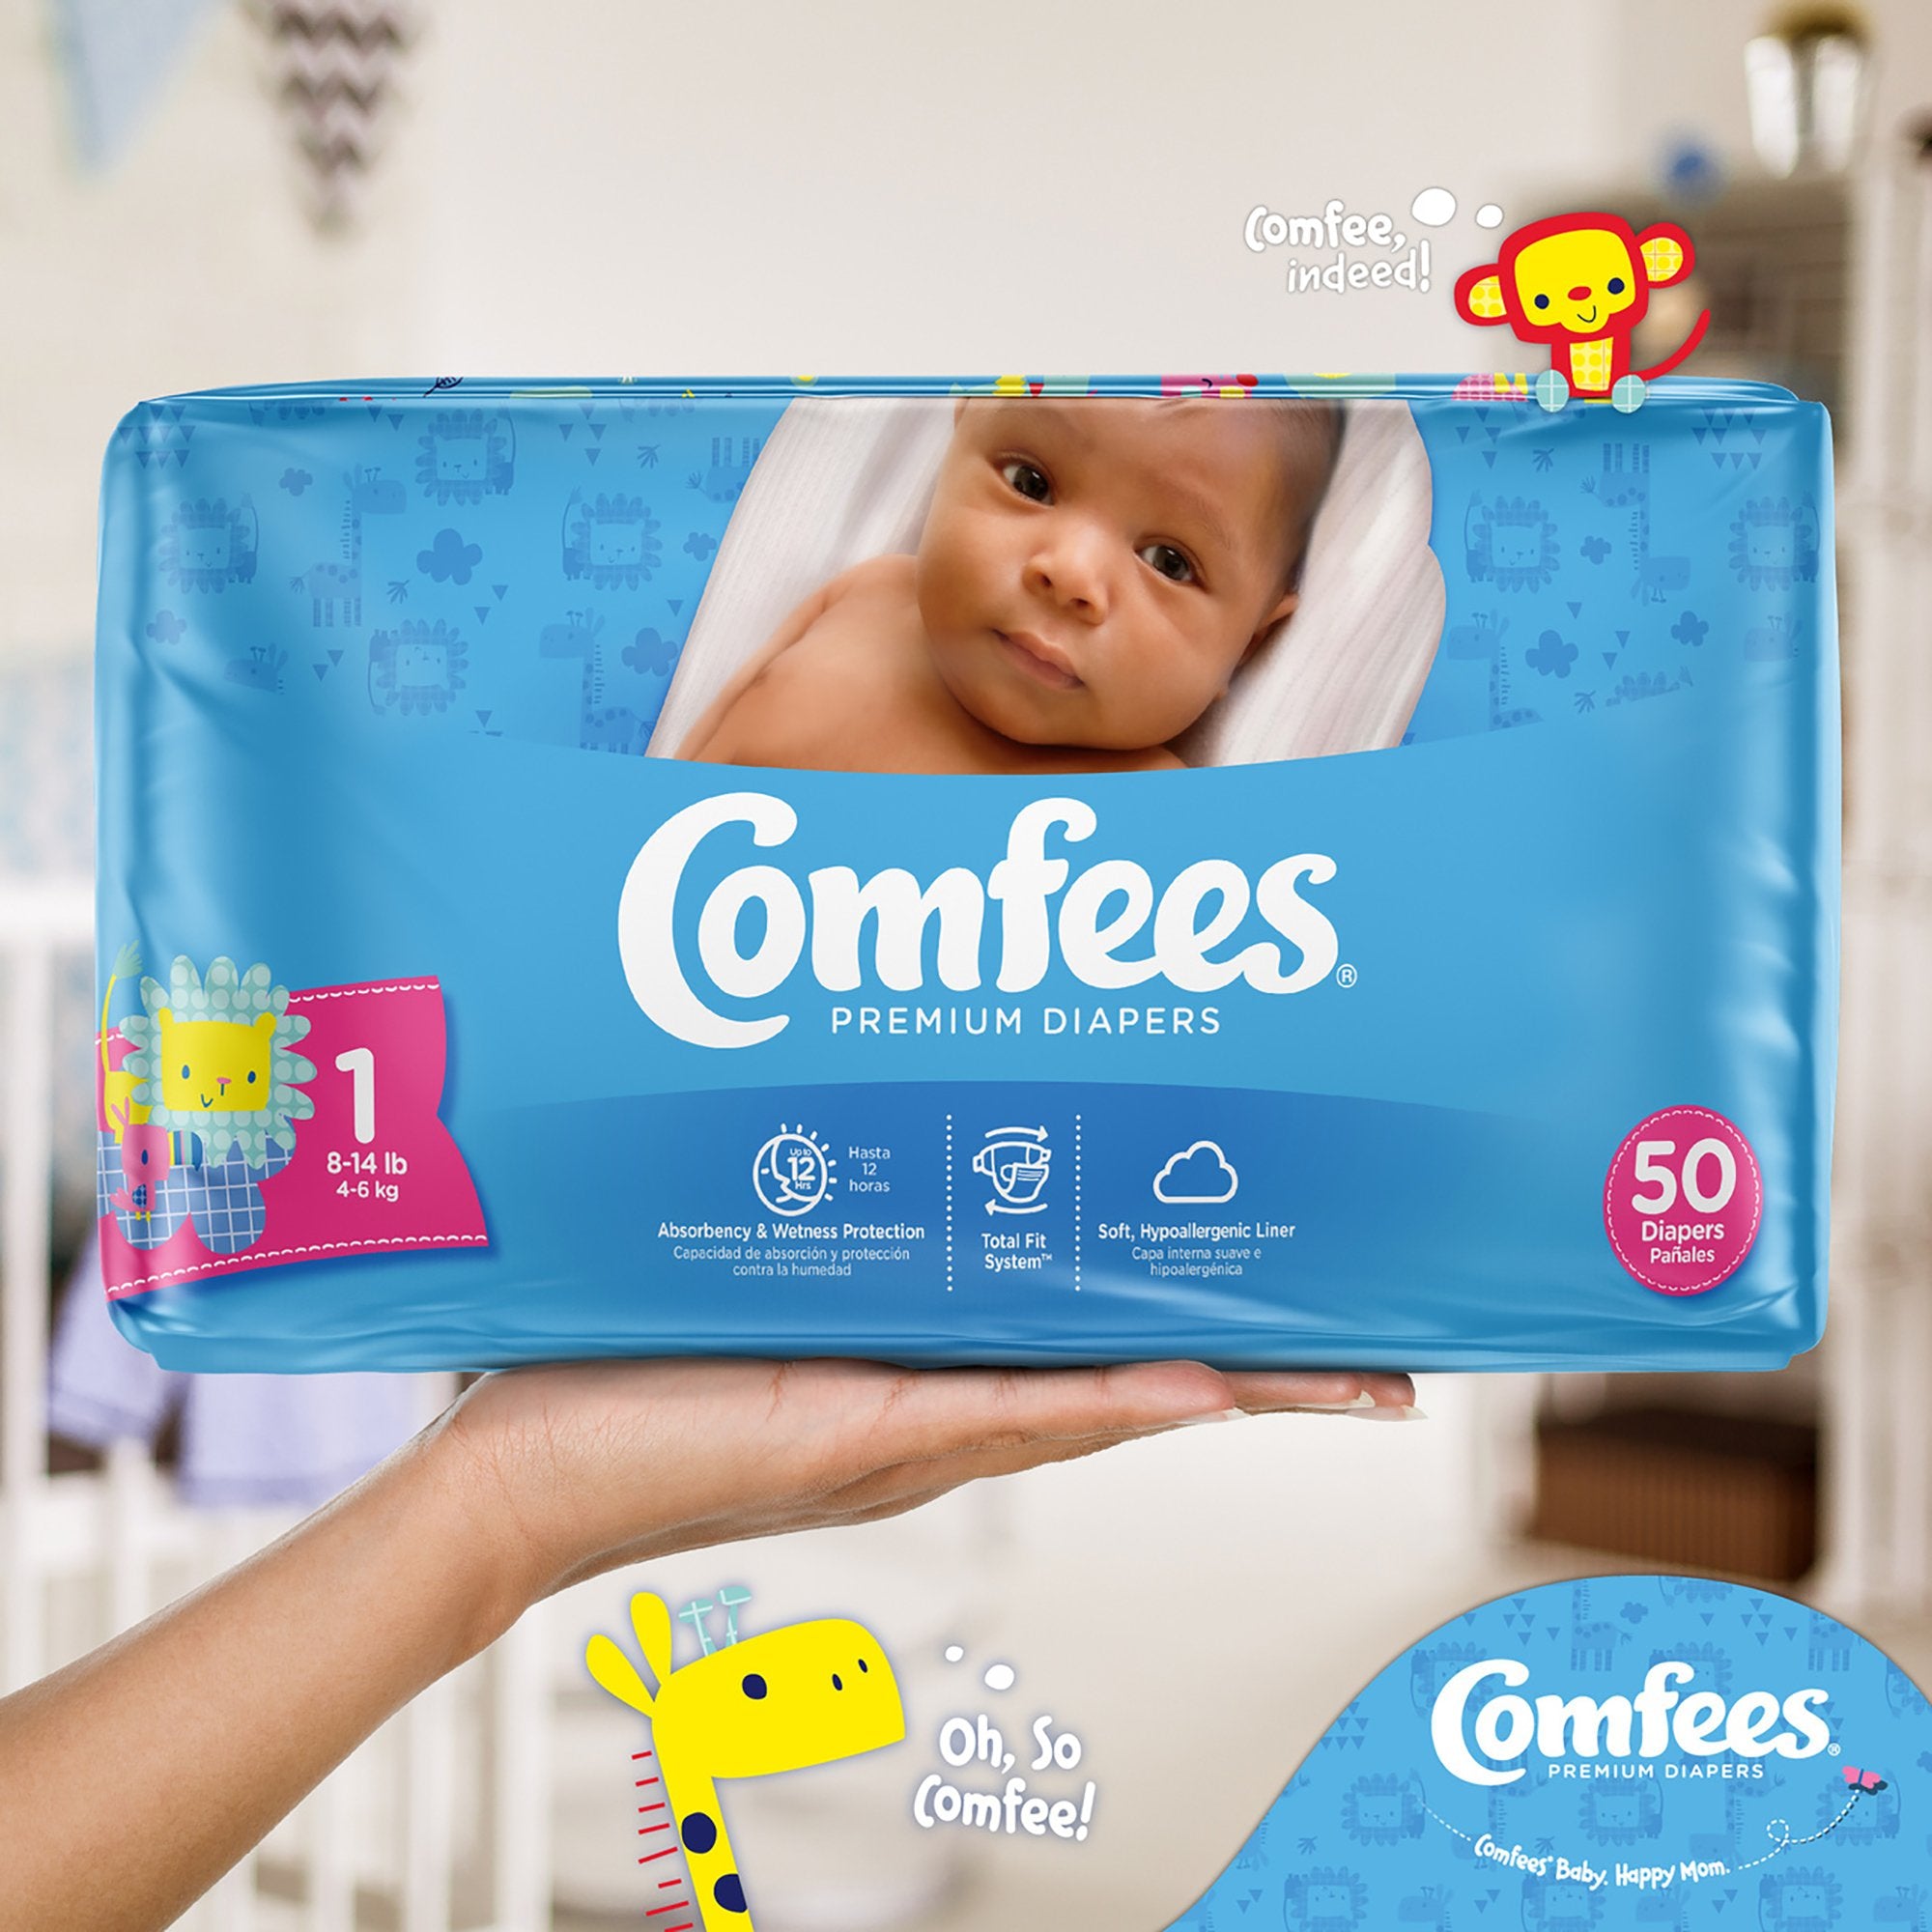 Unisex Baby Diaper Comfees Size 1 Disposable Moderate Absorbency